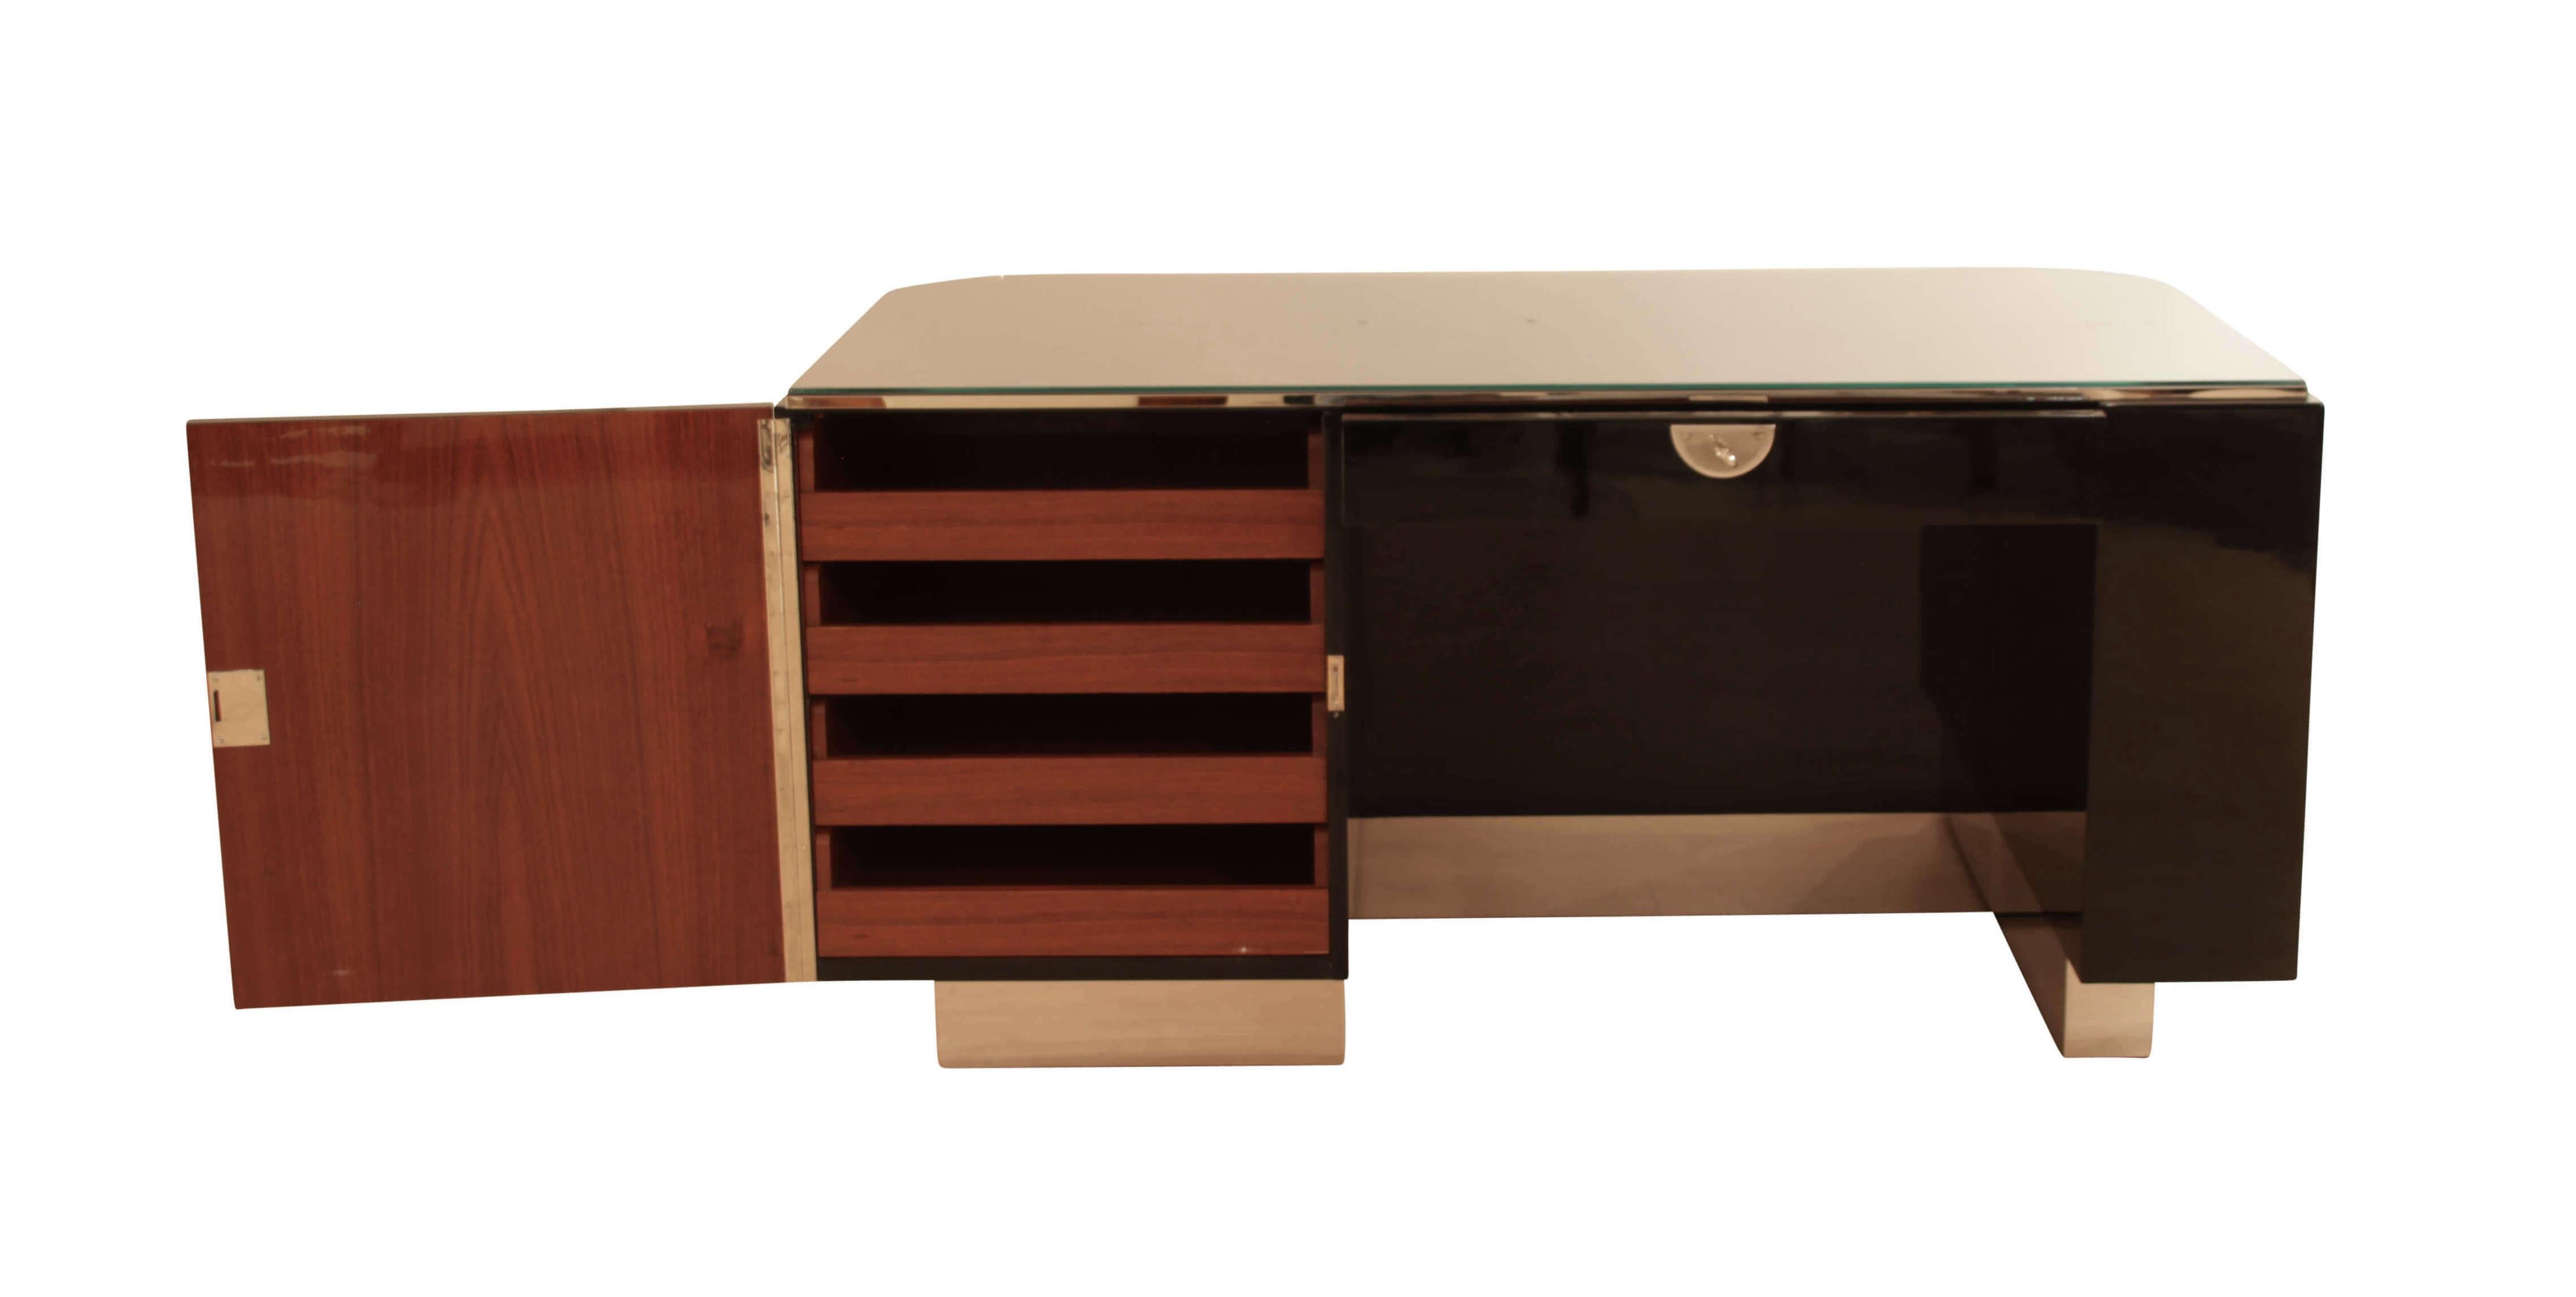 Mid-20th Century Bauhaus Desk, Black Lacquer and Chrome, Germany, circa 1930